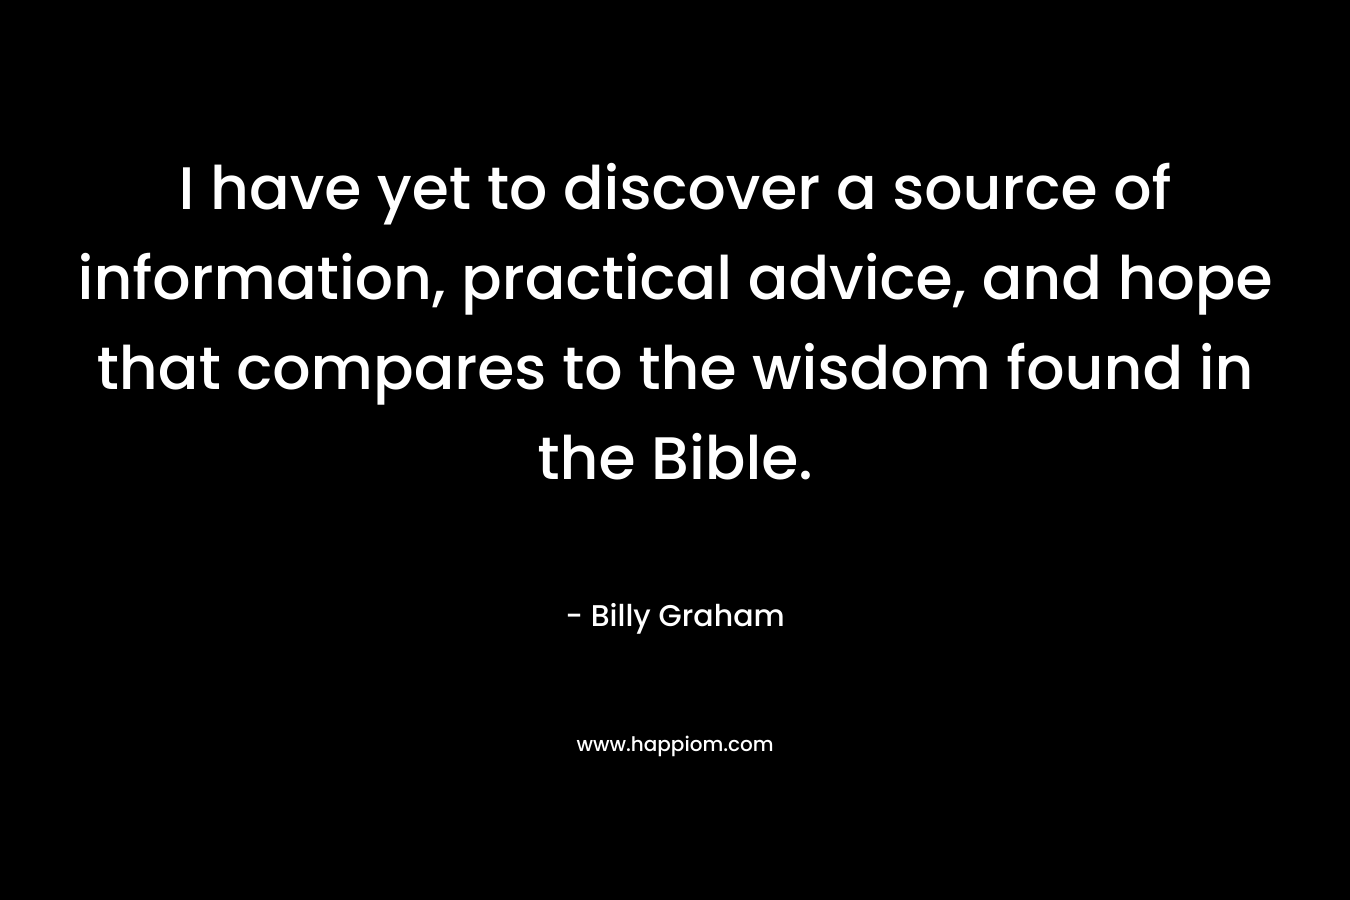 I have yet to discover a source of information, practical advice, and hope that compares to the wisdom found in the Bible.